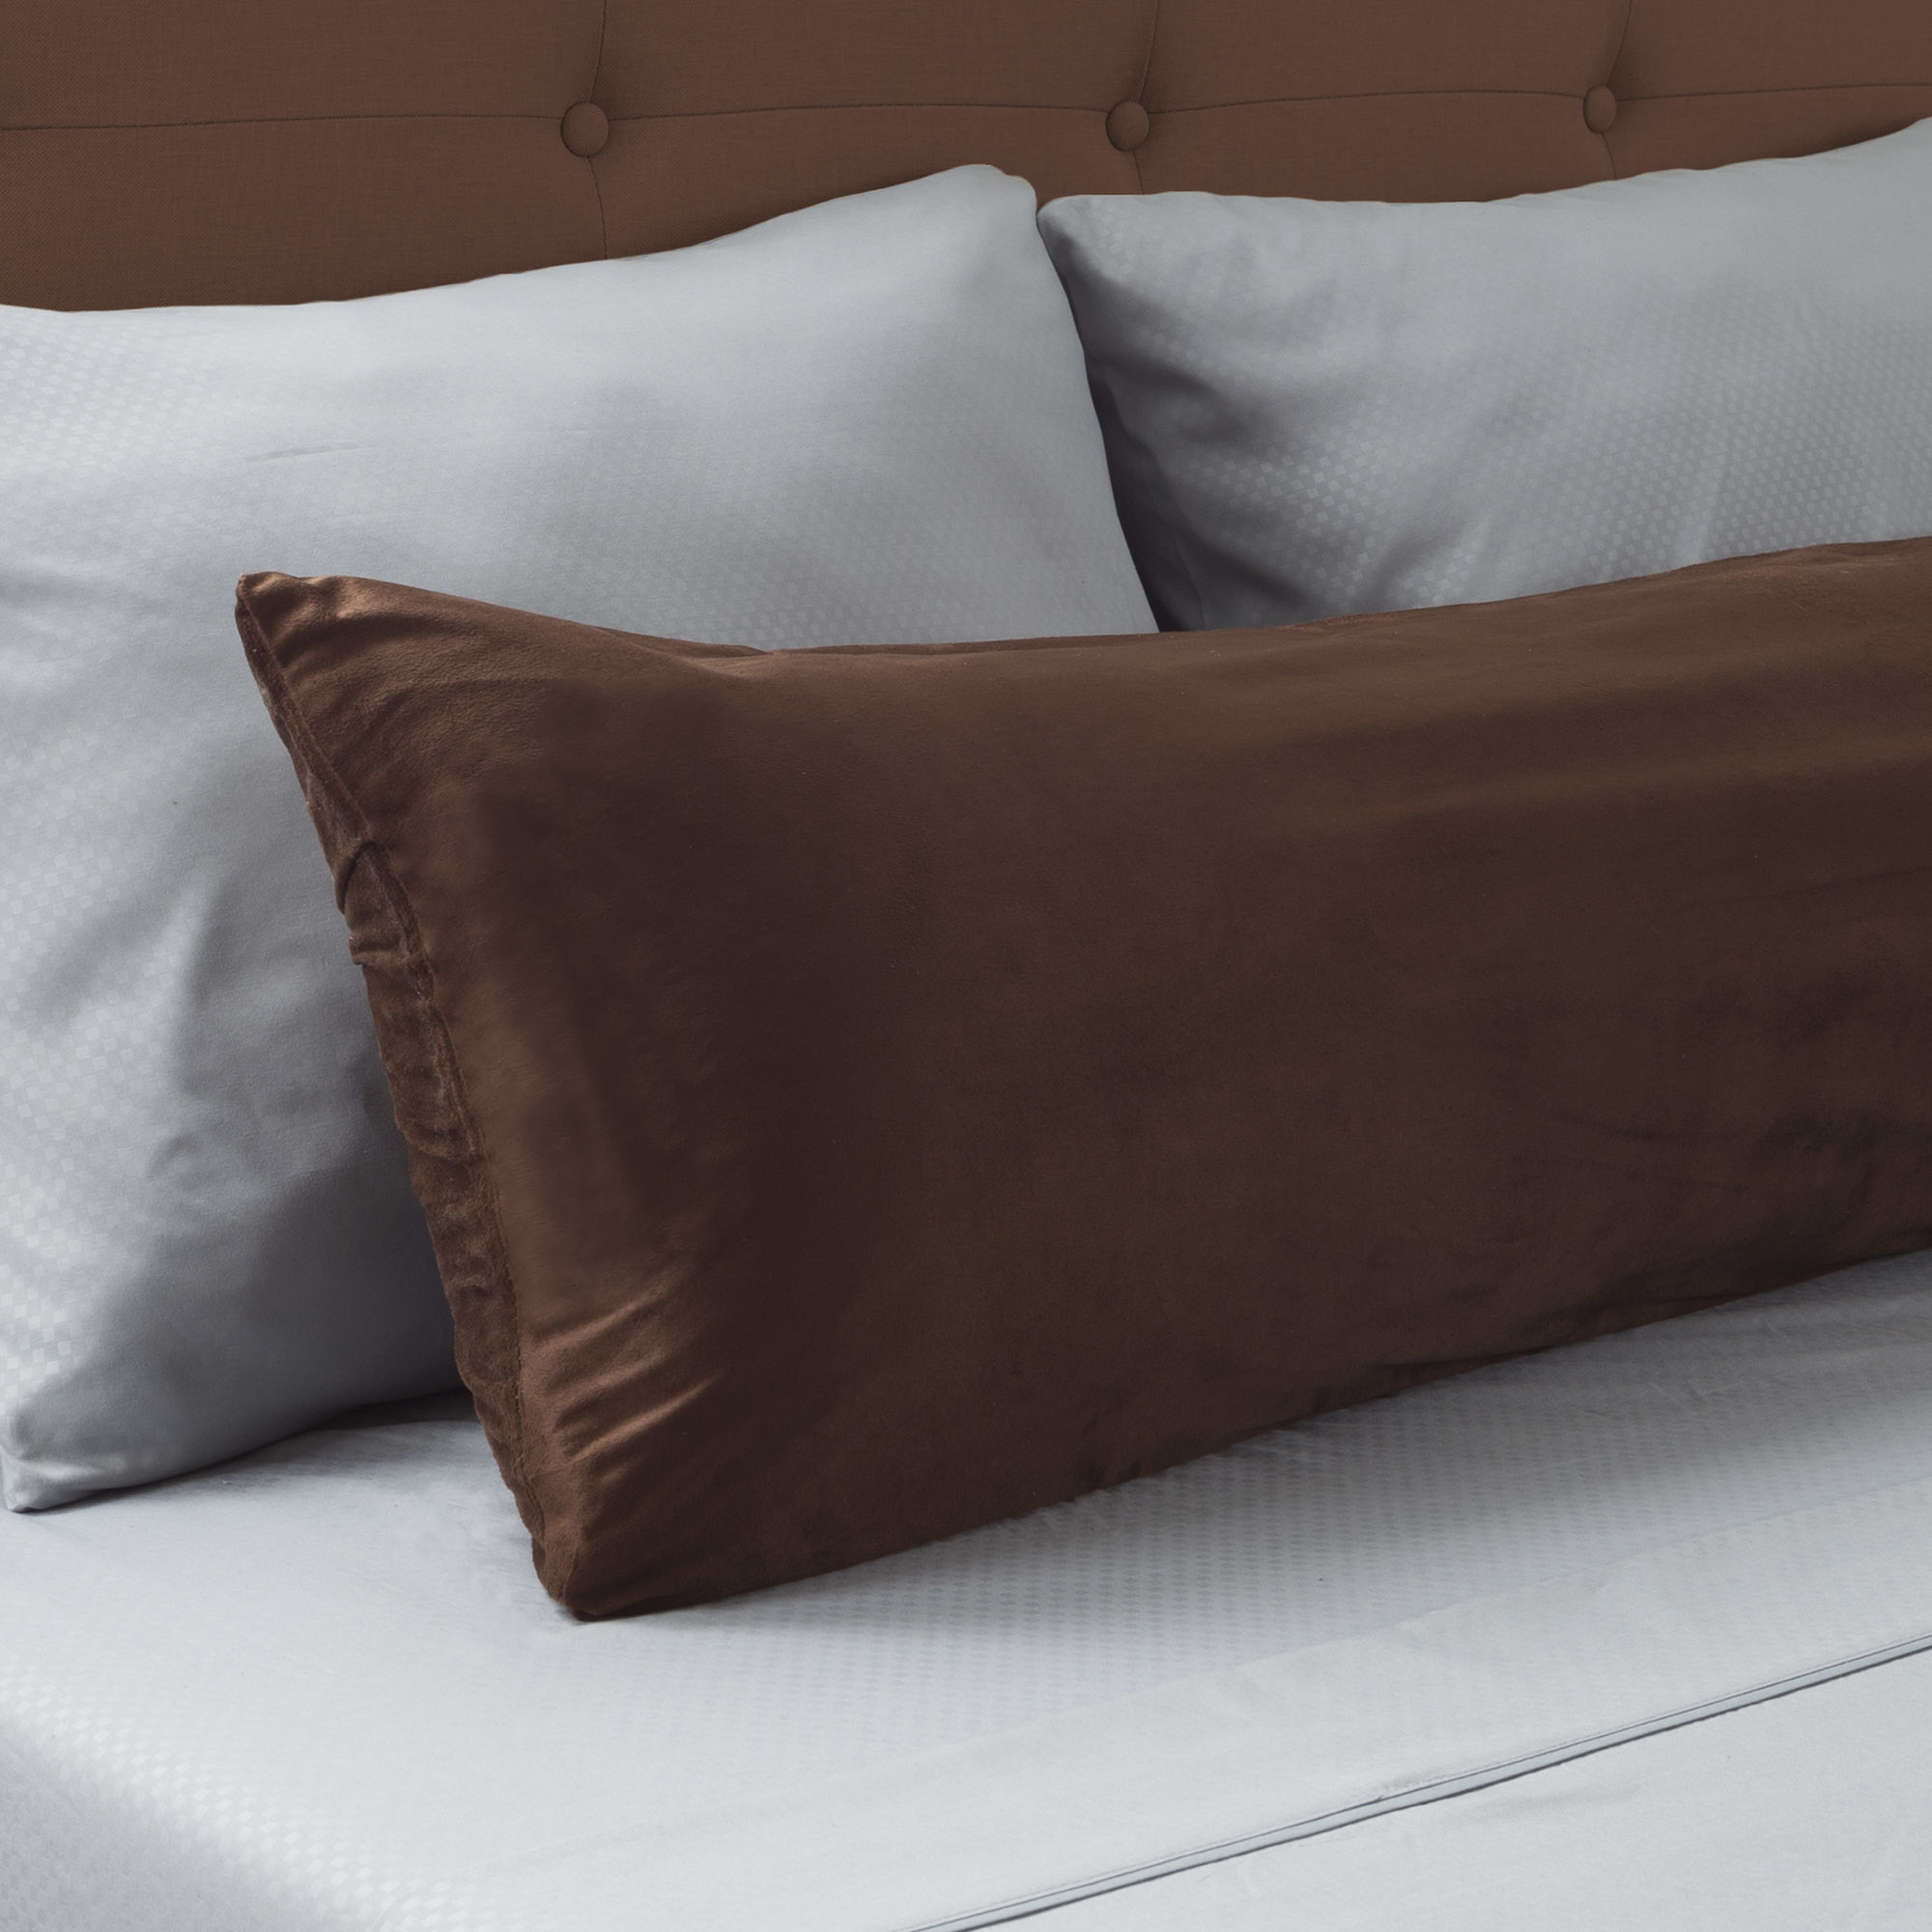 Microsuede Body Pillow Cover Pillowcase Zippered Washable 51 X 17 Inches Brown